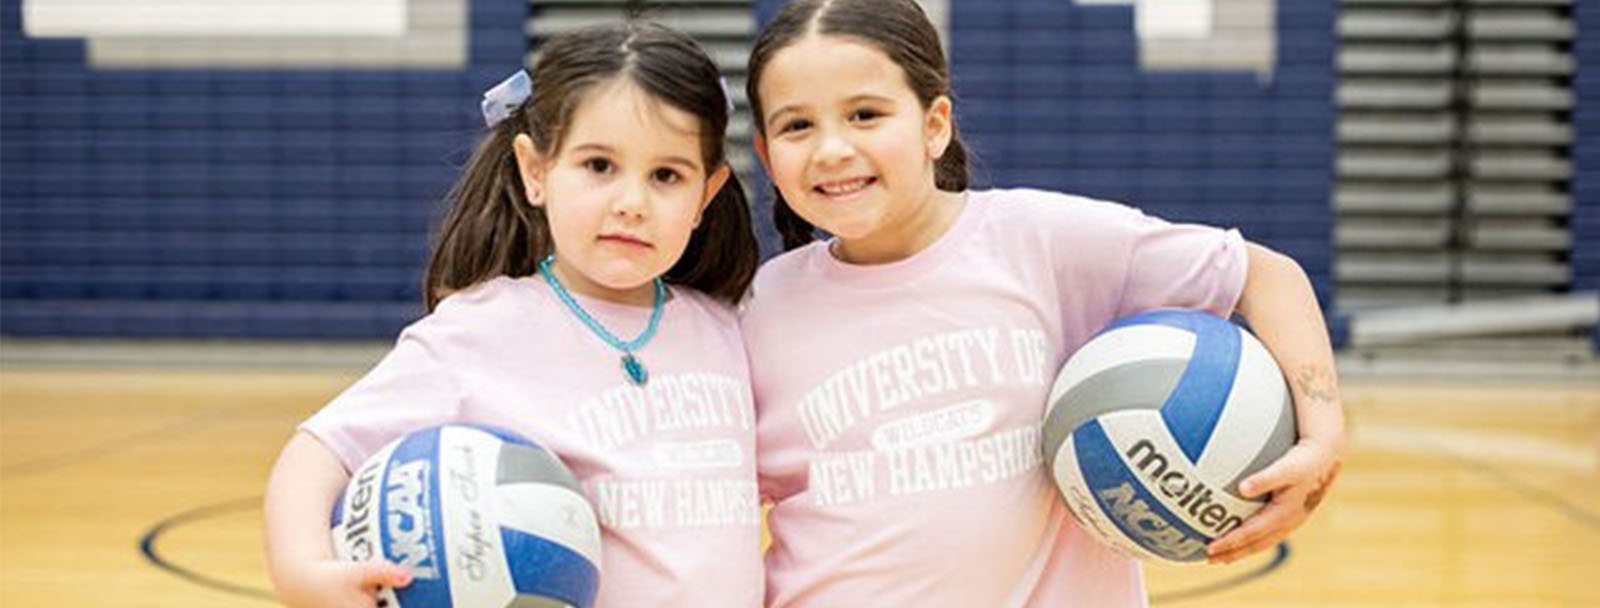 Two young girls holding volleyballs